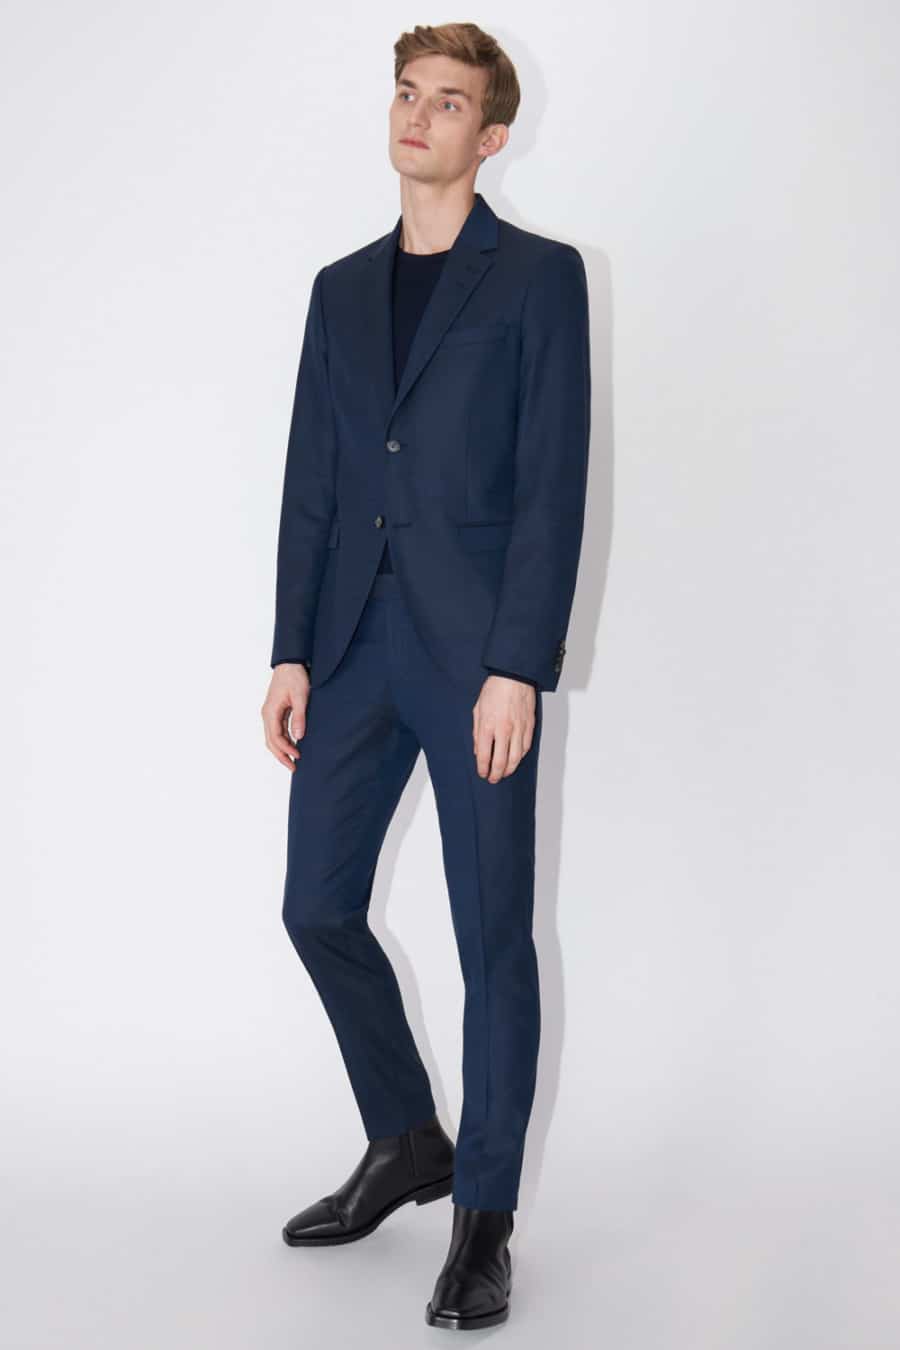 Men's navy suit, black T-shirt and black leather Chelsea boots outfit